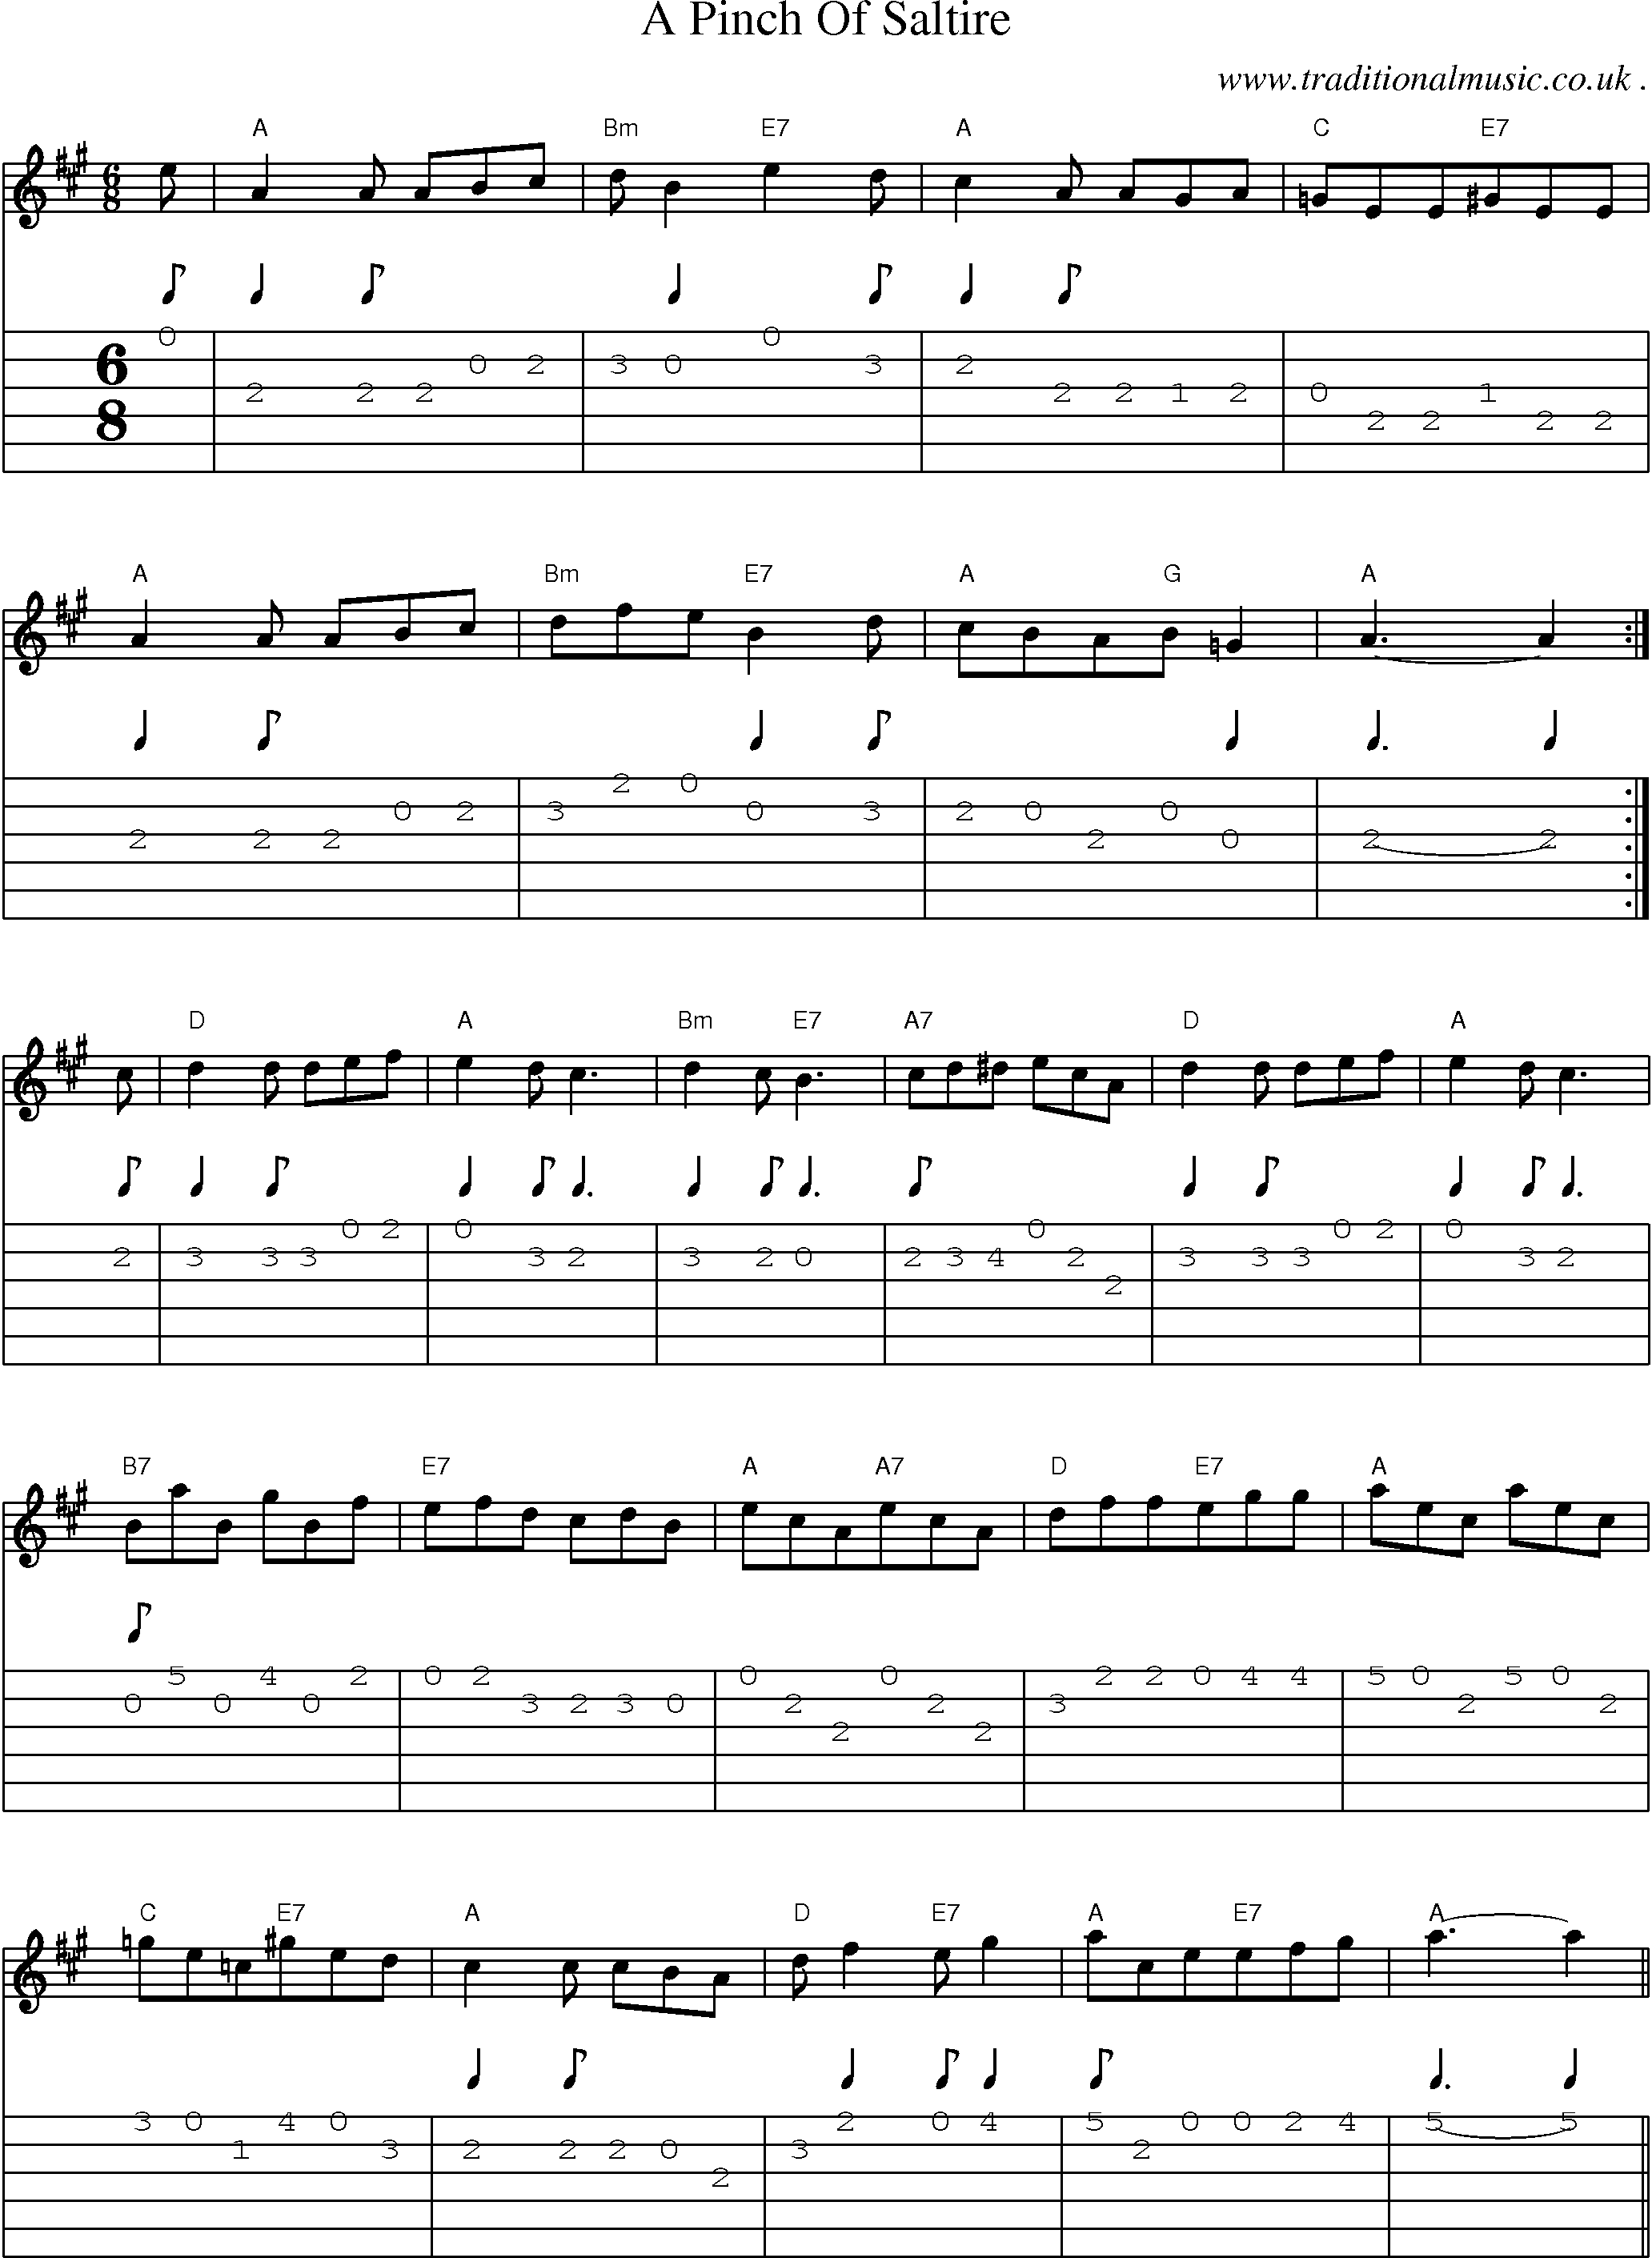 Sheet-Music and Guitar Tabs for A Pinch Of Saltire